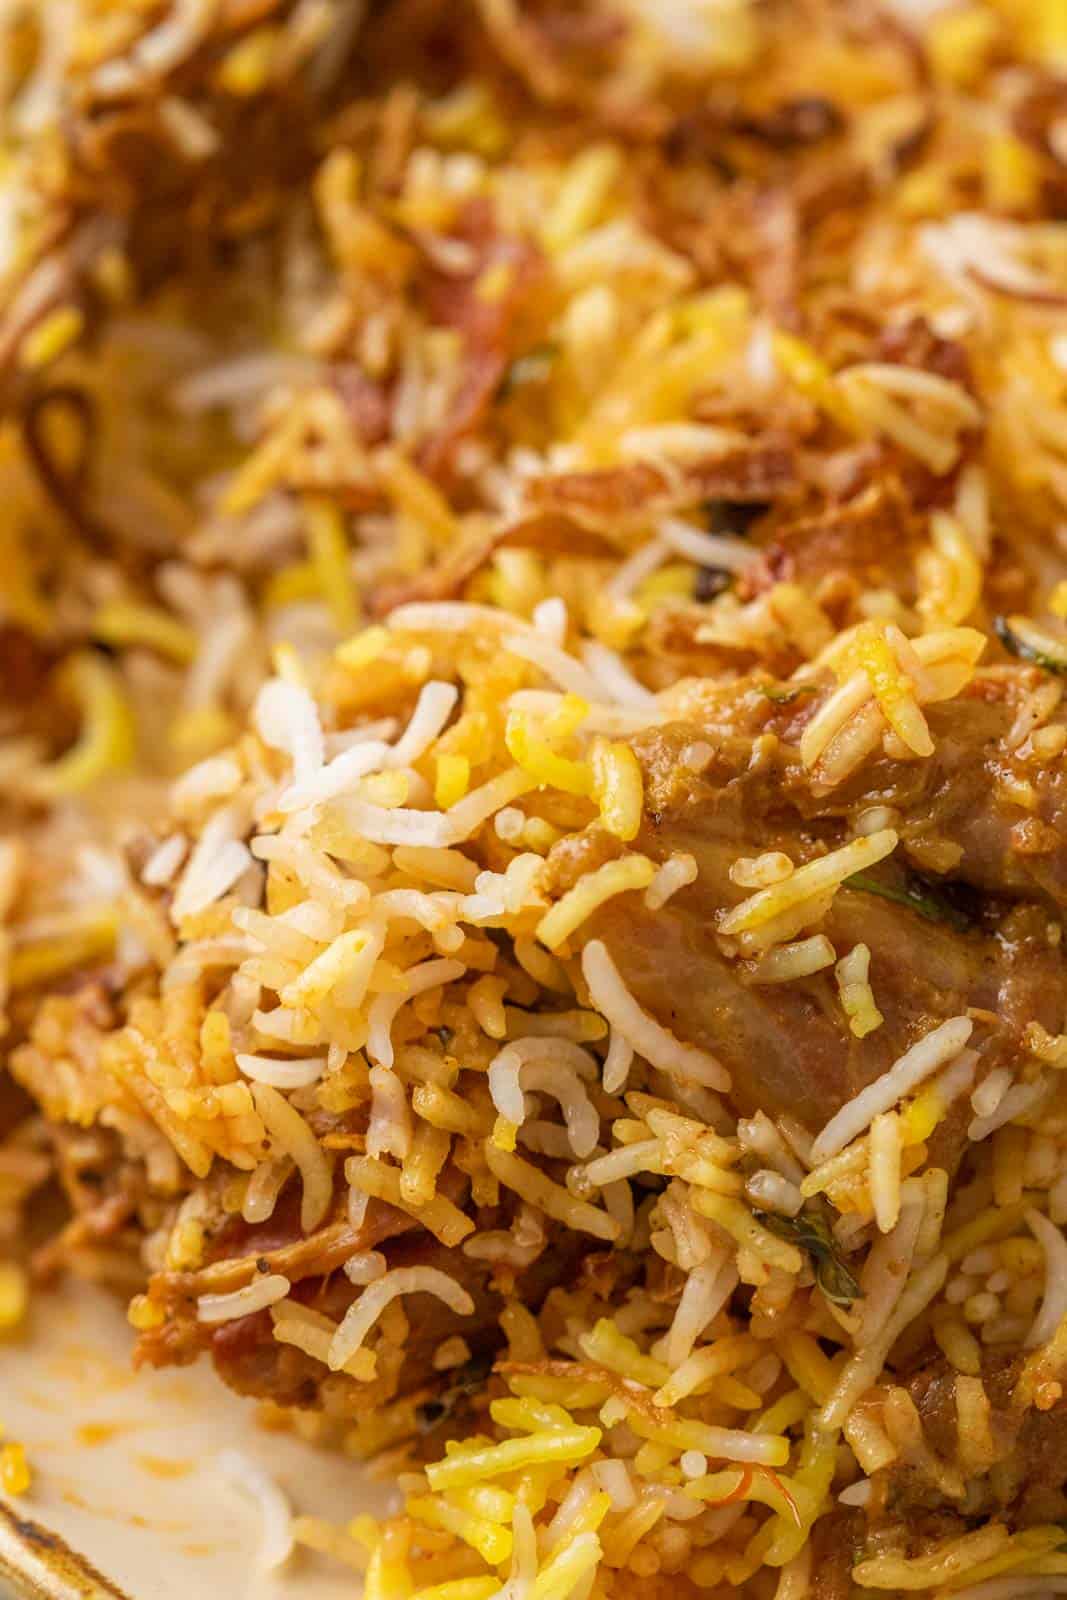 Closeup of the grains of rice and a piece of mutton from the mutton biryani